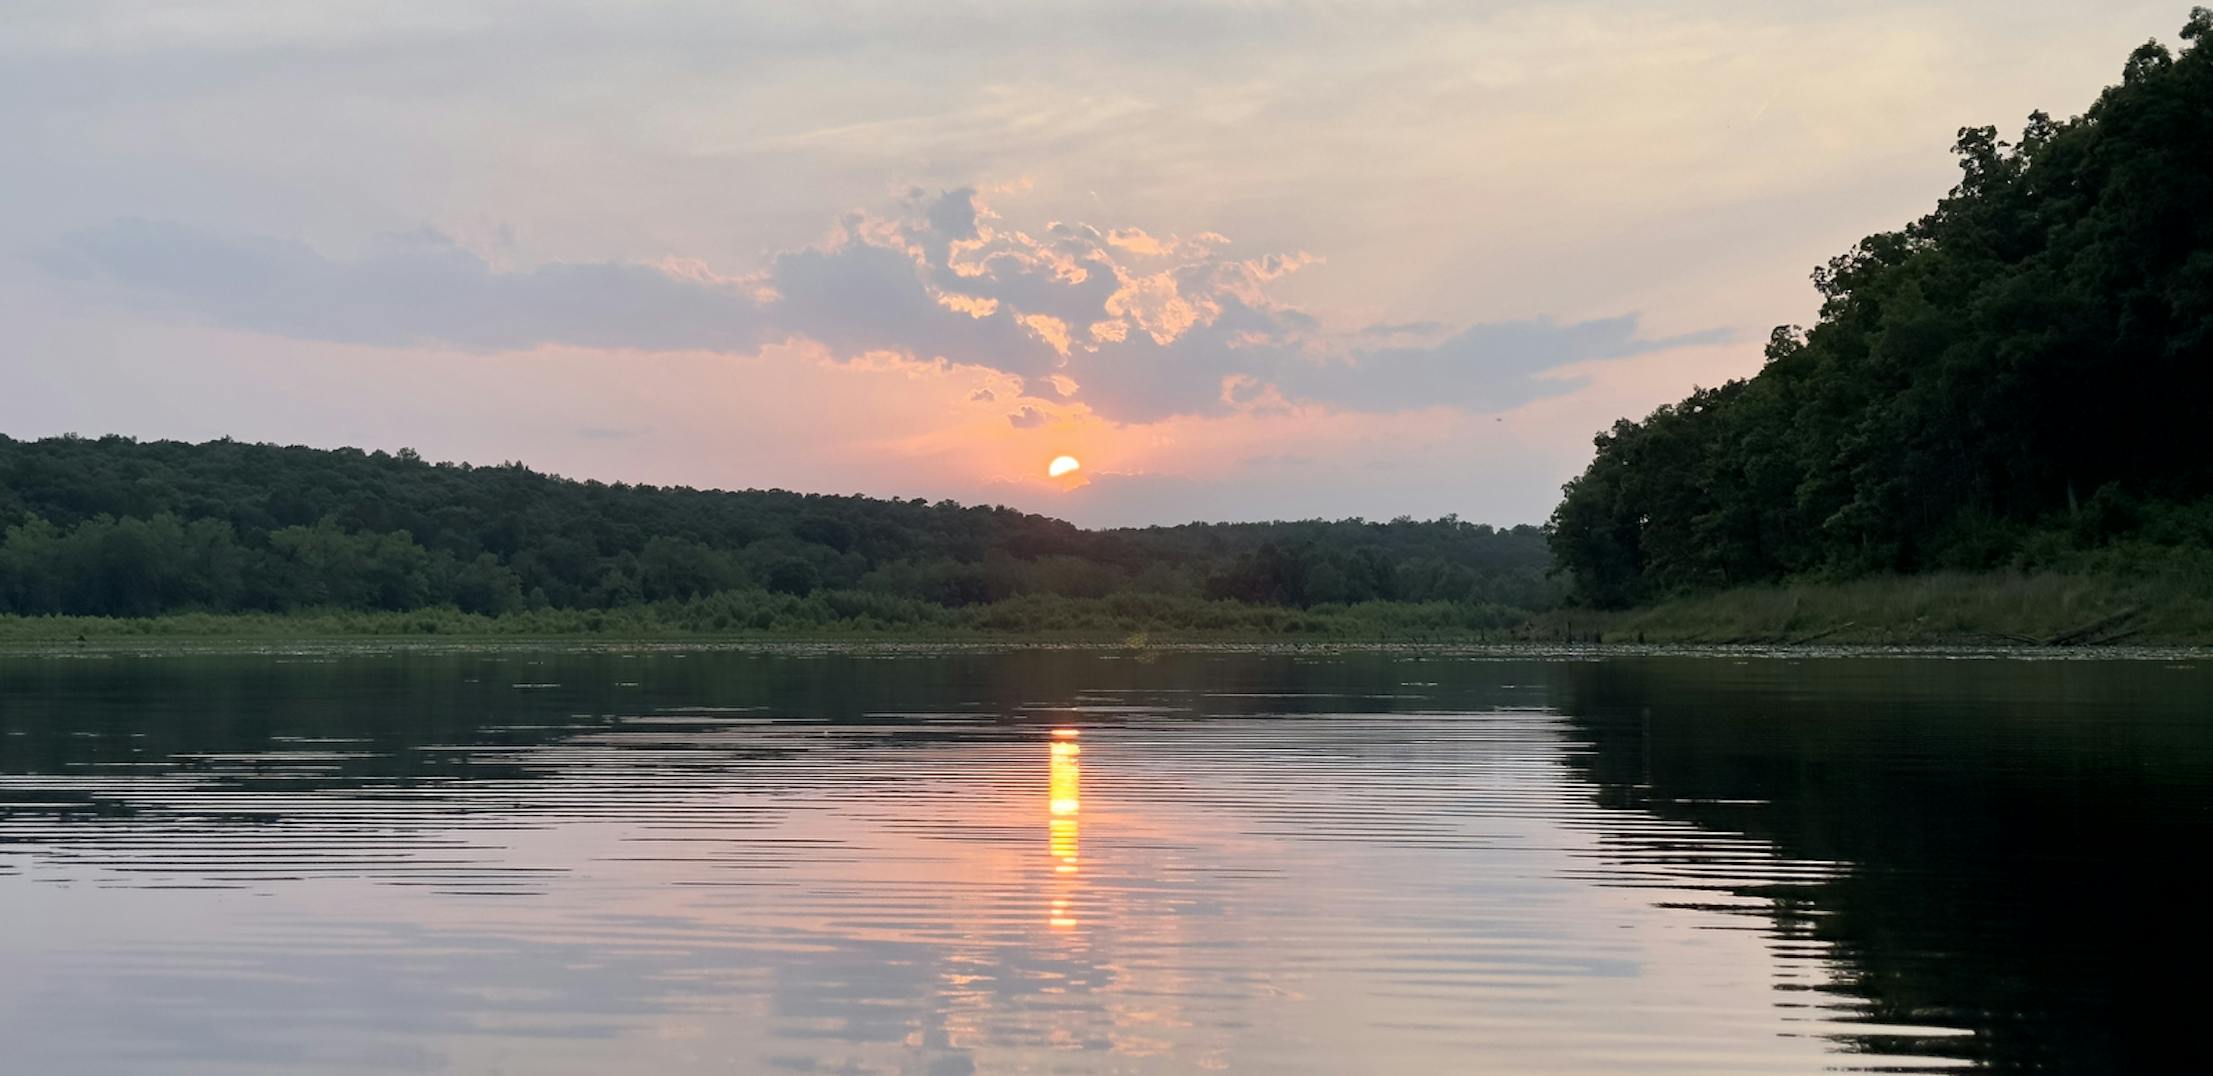 The sun sets over Crane Lake in Mark Twain National Forest.